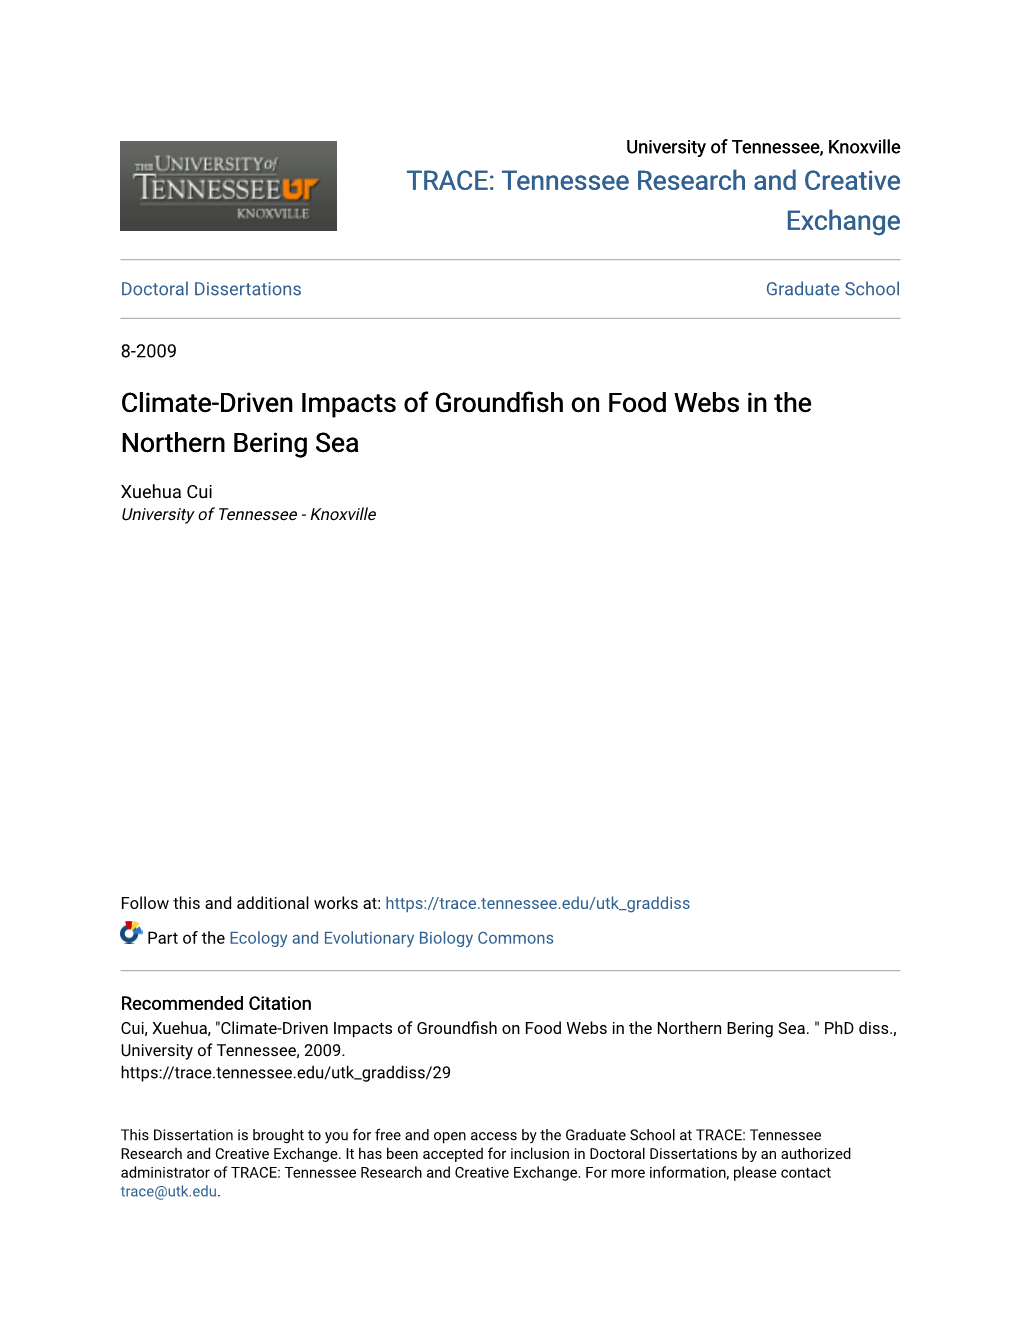 Climate-Driven Impacts of Groundfish on Food Webs in the Northern Bering